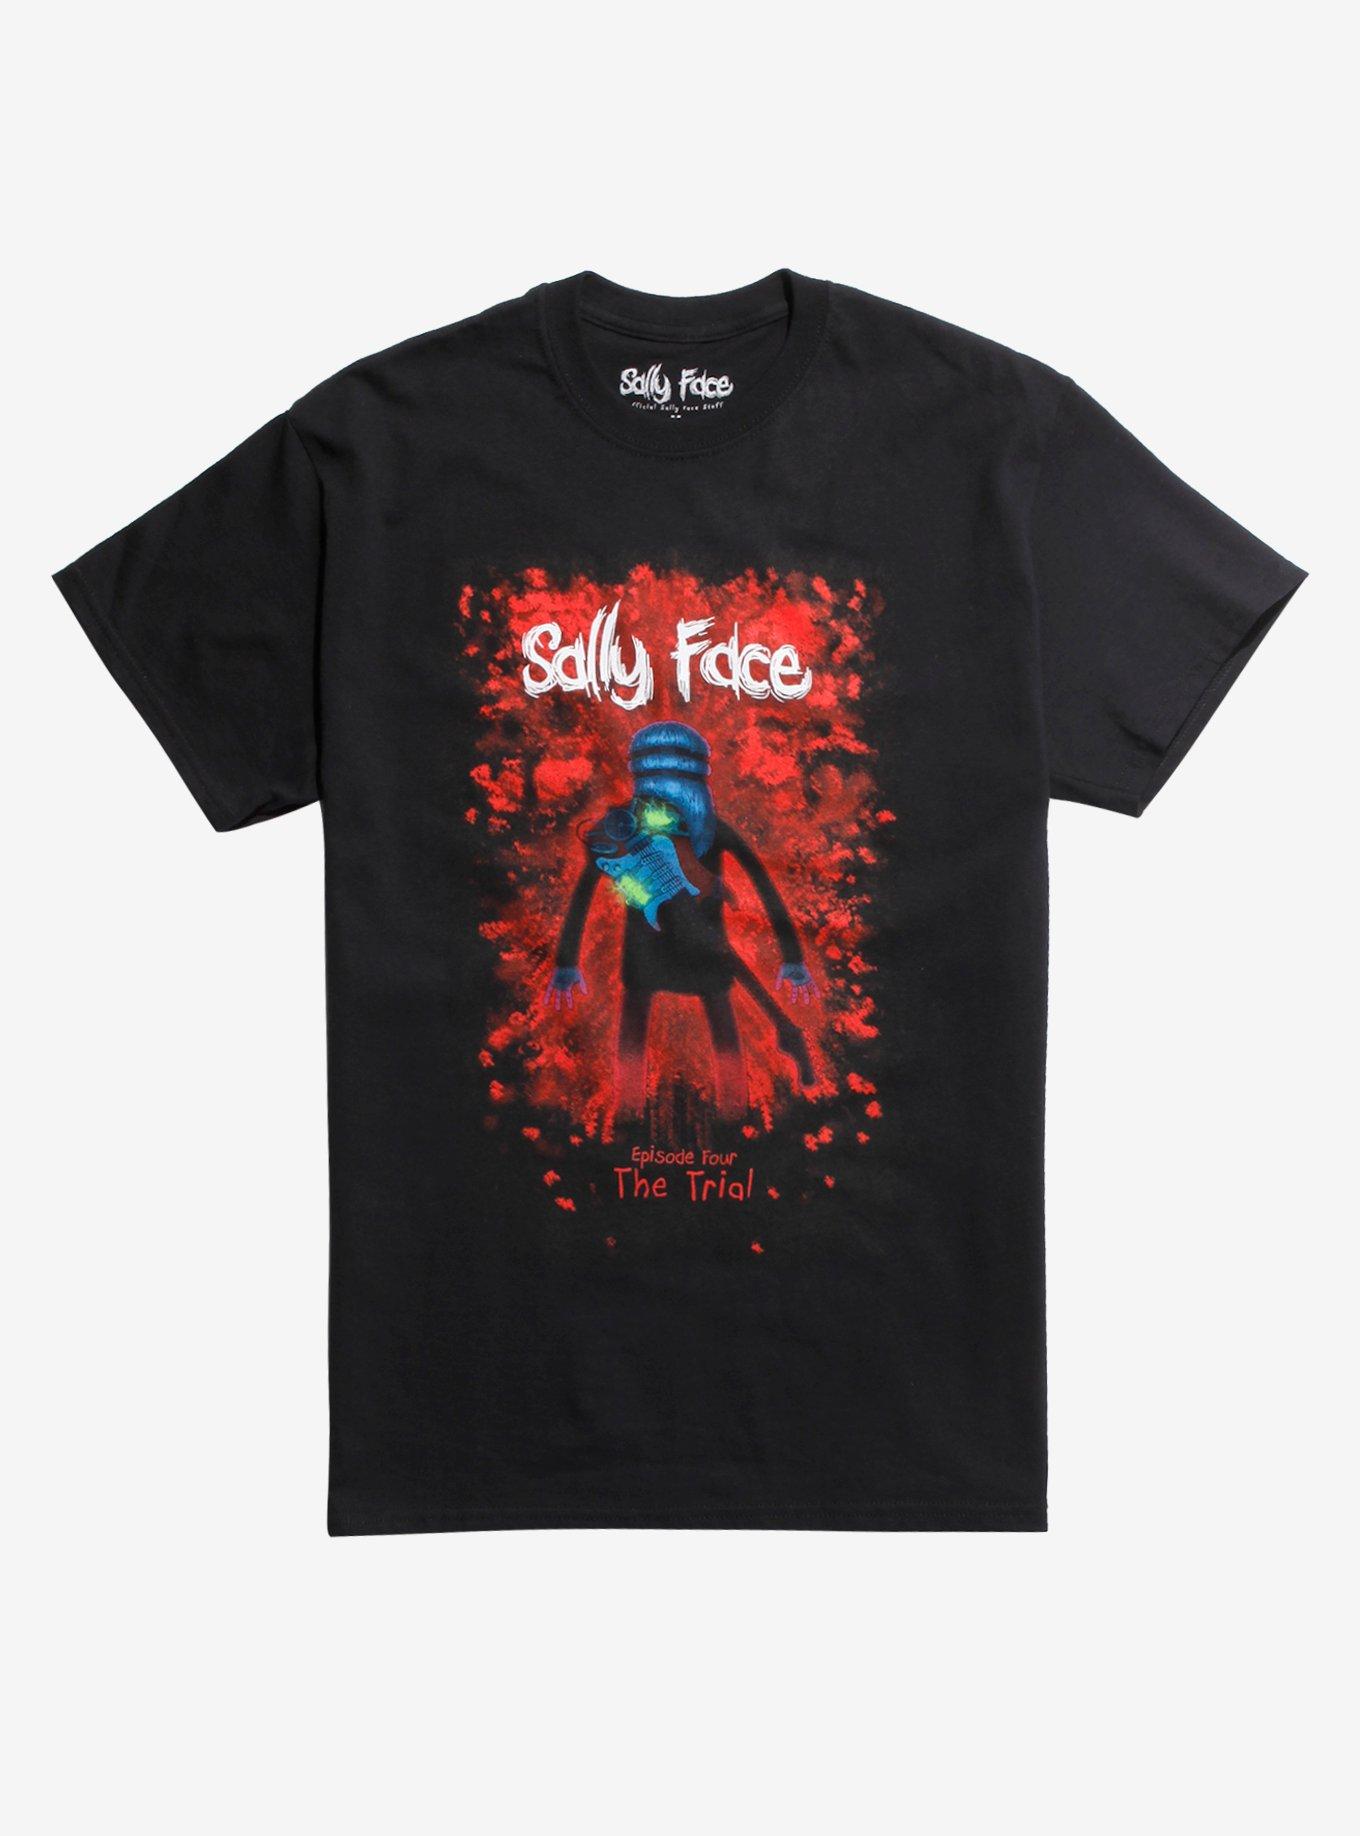 Sally Face Episode Four The Trial T-Shirt, MULTI, hi-res